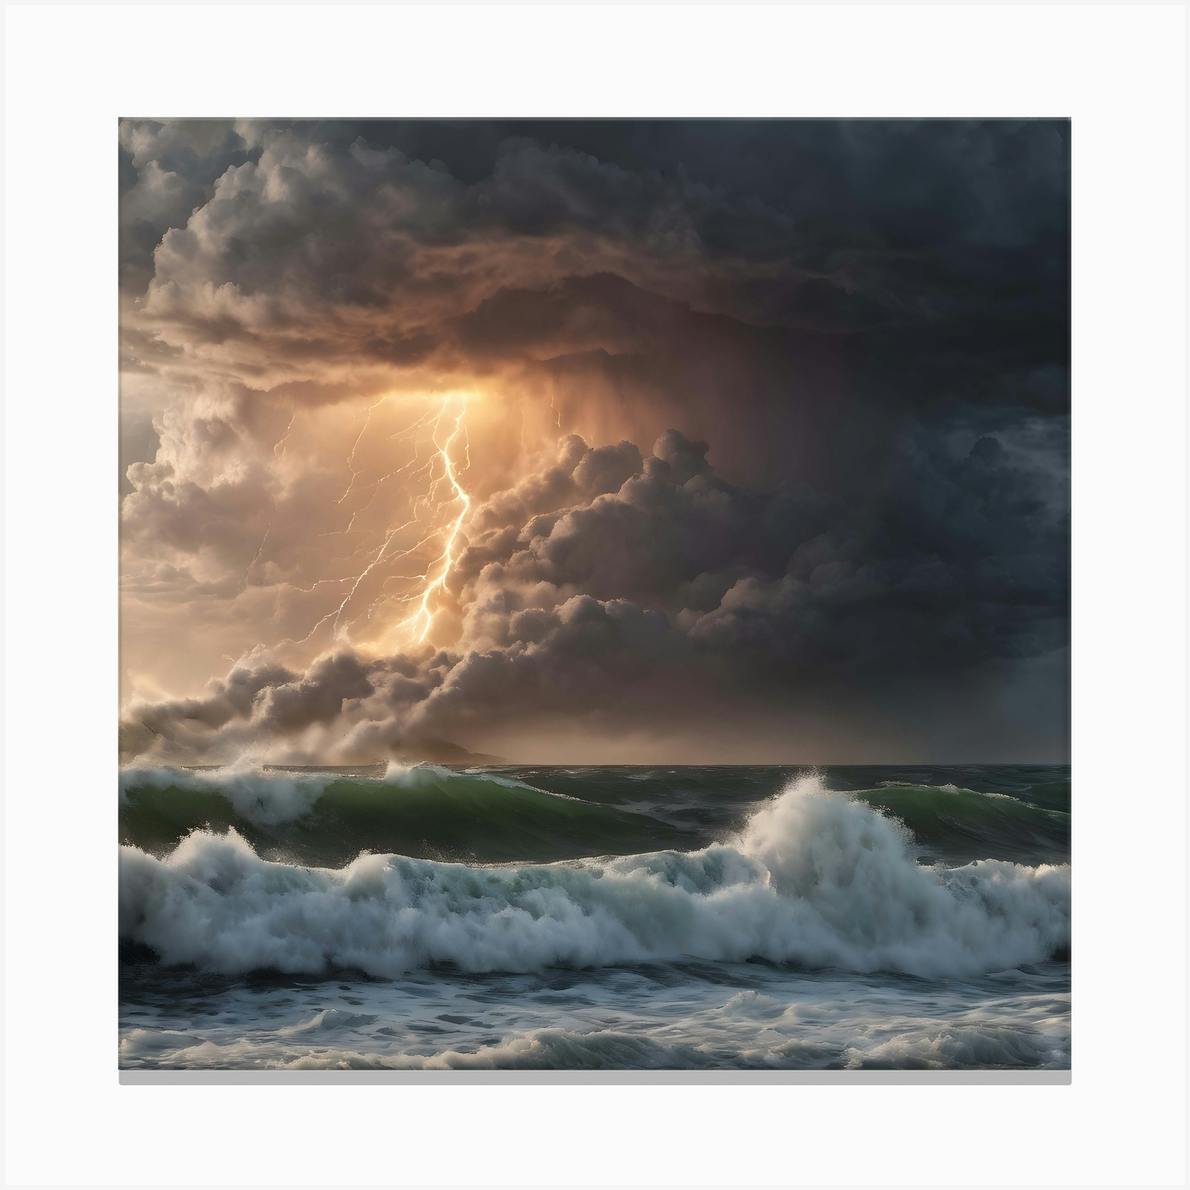 Thunder Storm Collection 6 Art Print by Euro73_ - Fy